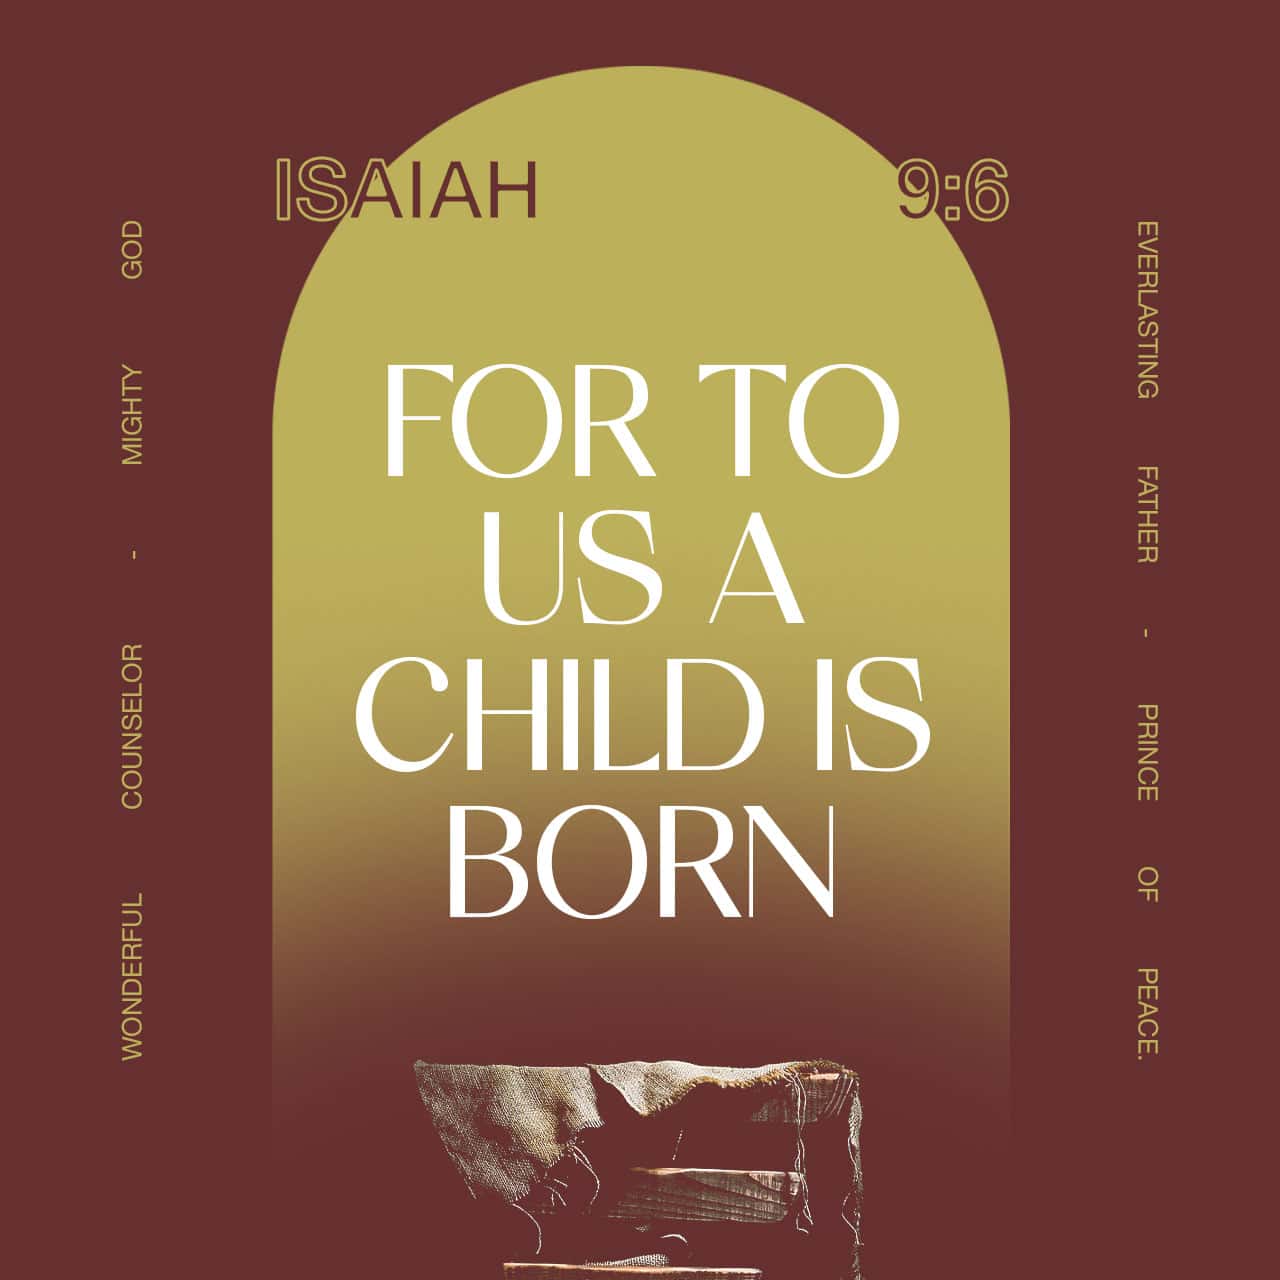 For to us a child is born - Isaiah 9:6 - Verse Image